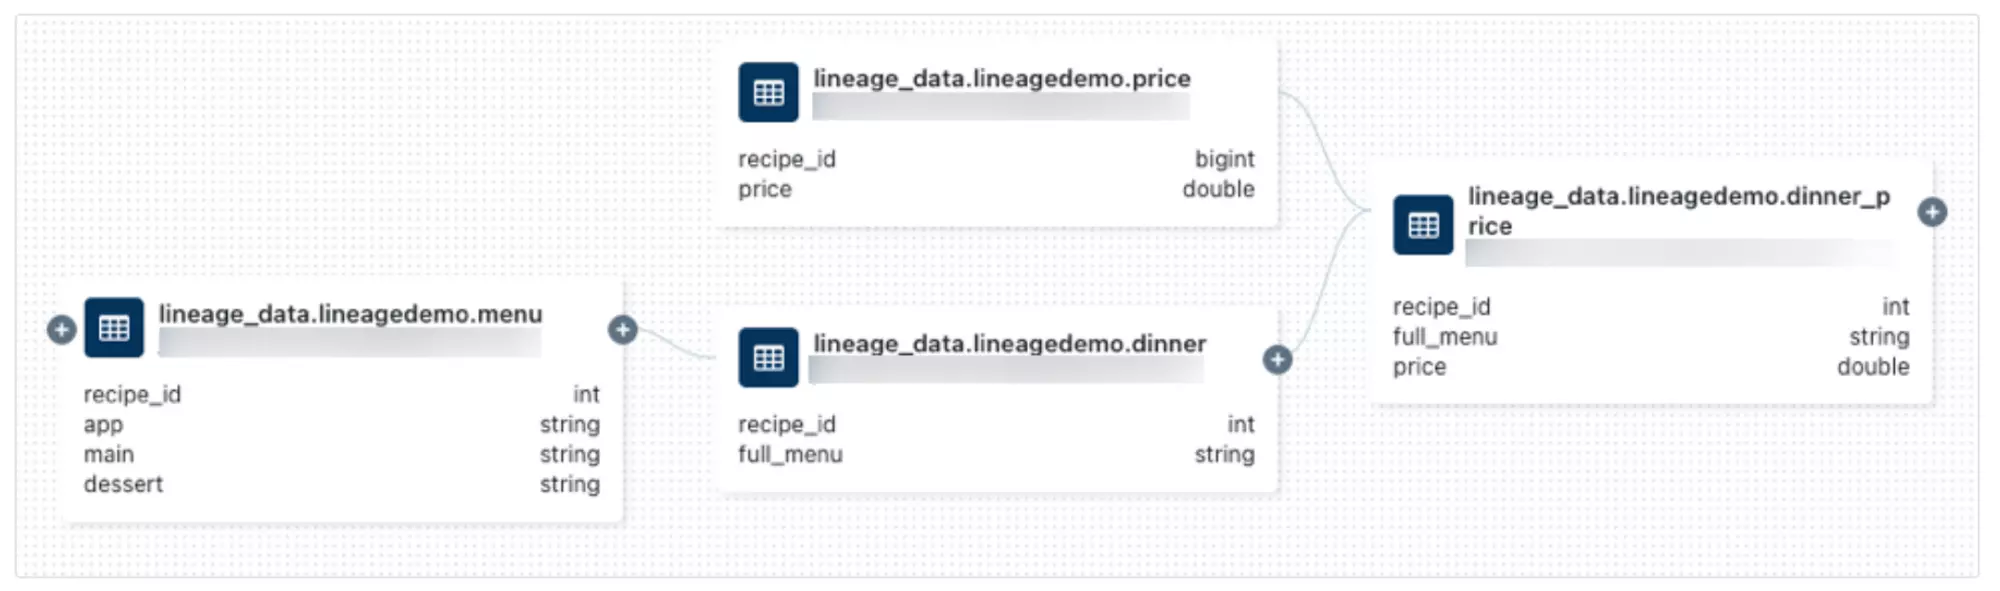 Example of Data Lineage in Unity Catalog - Image from the official documentation of Databricks